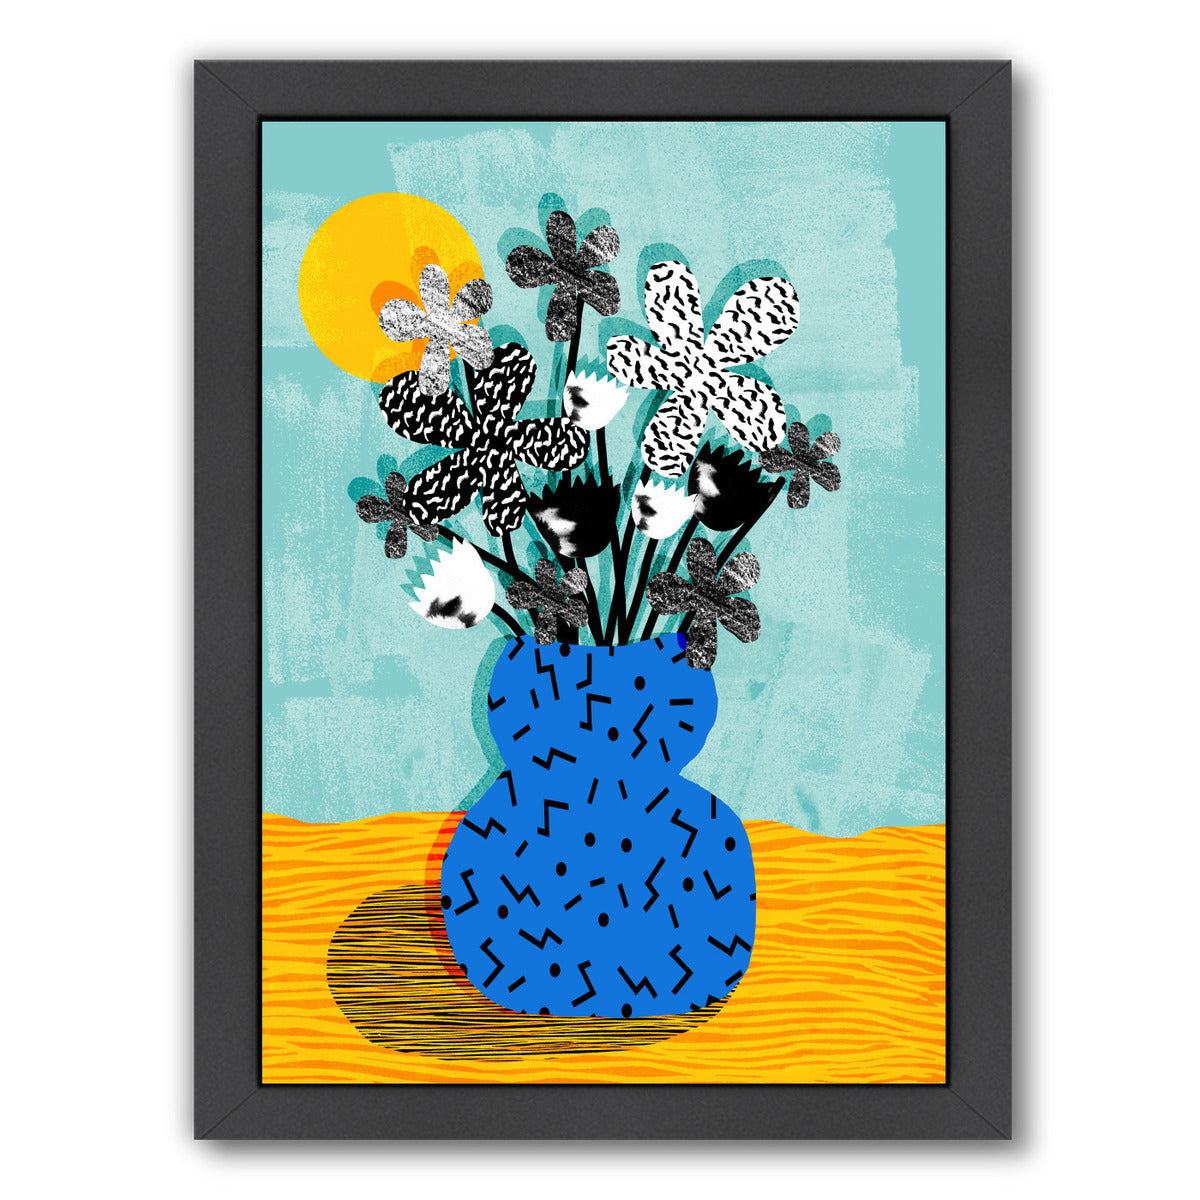 Fave by Wacka Designs Framed Print - Americanflat